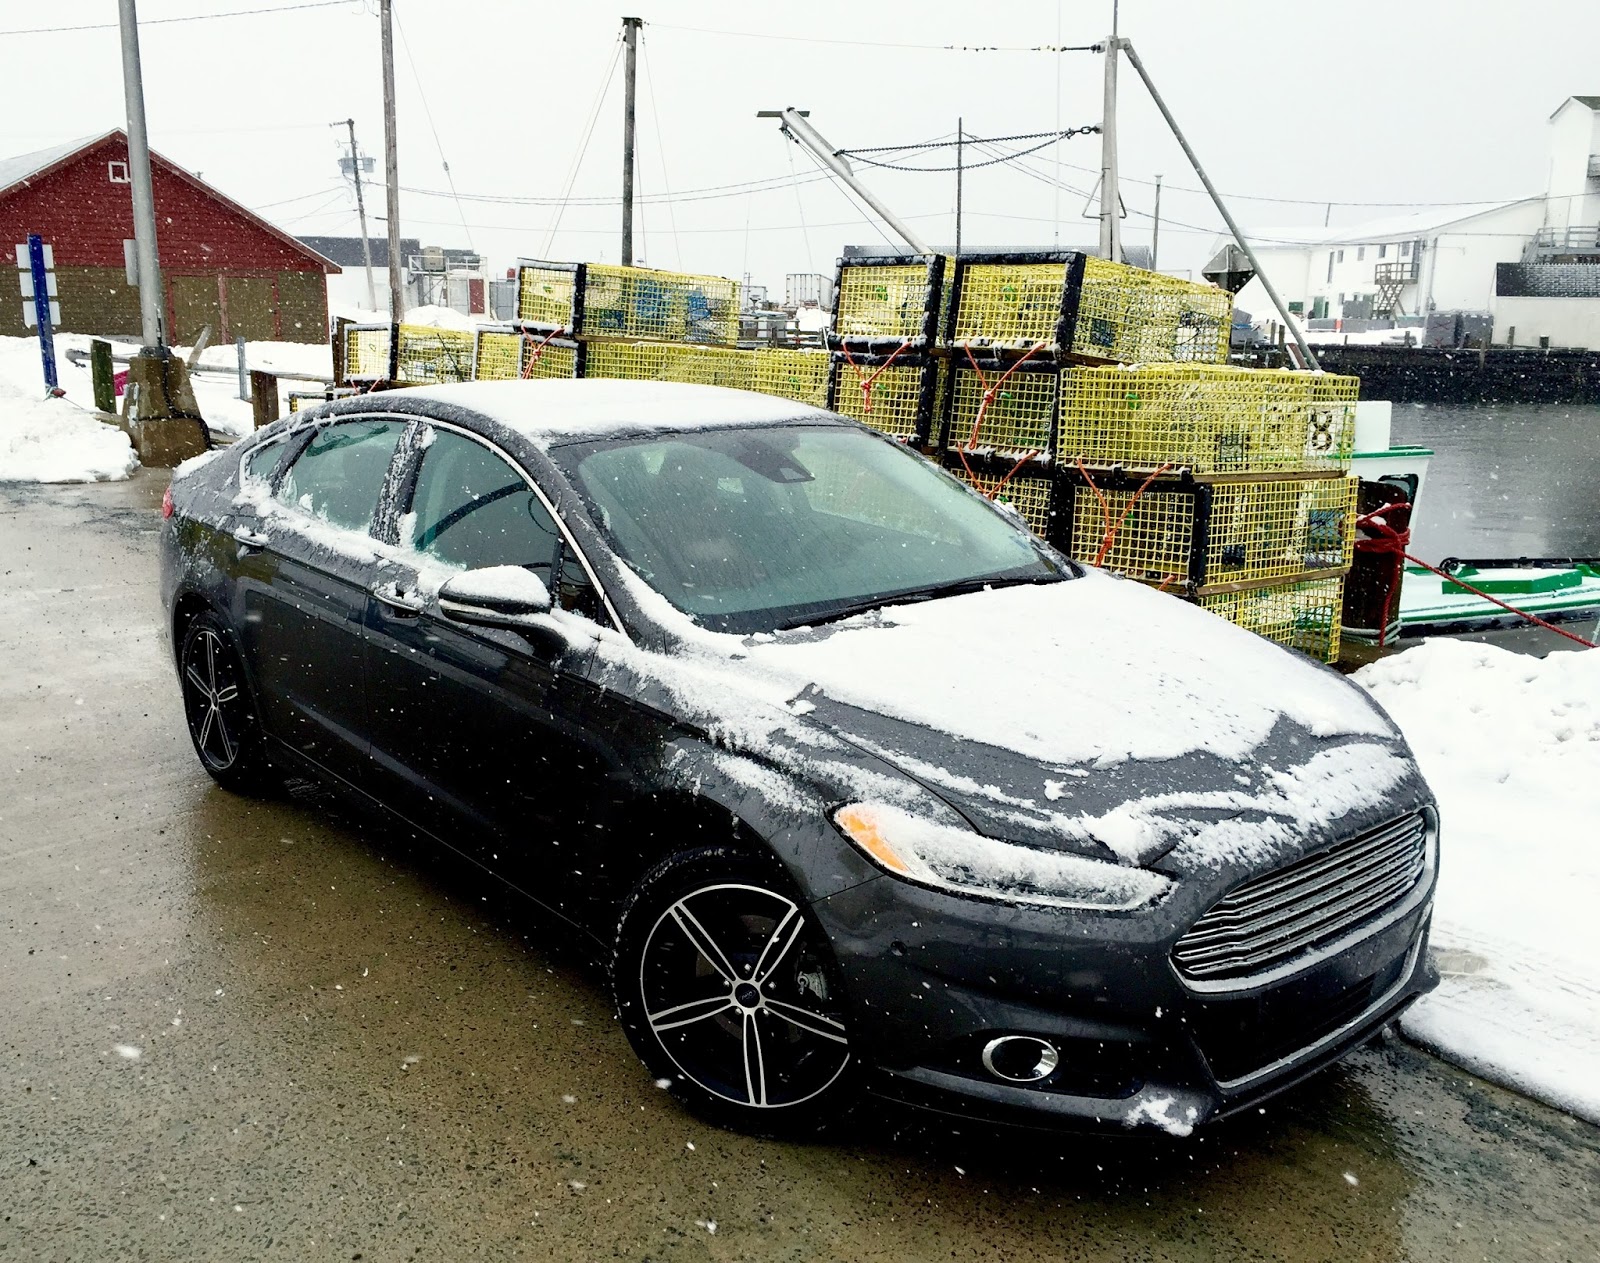 2015 Ford Fusion Titanium AWD Review - Yet Another Ford Driver's Car